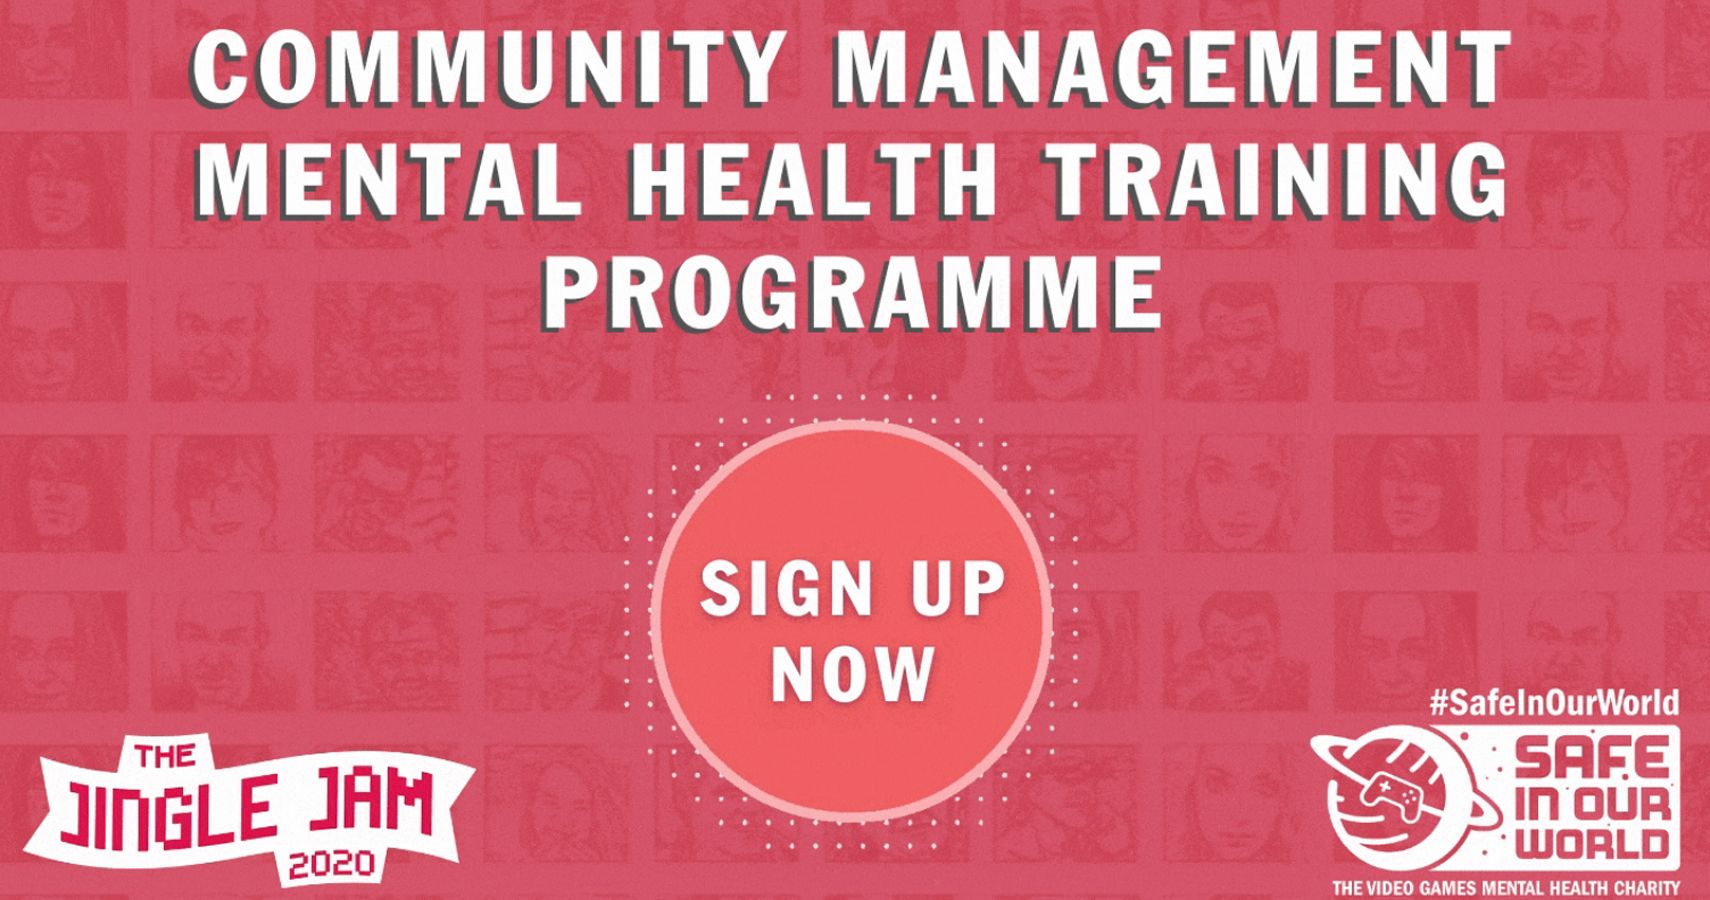 Safe In Our World Announces Free “Community Management Mental Health Training Programme”